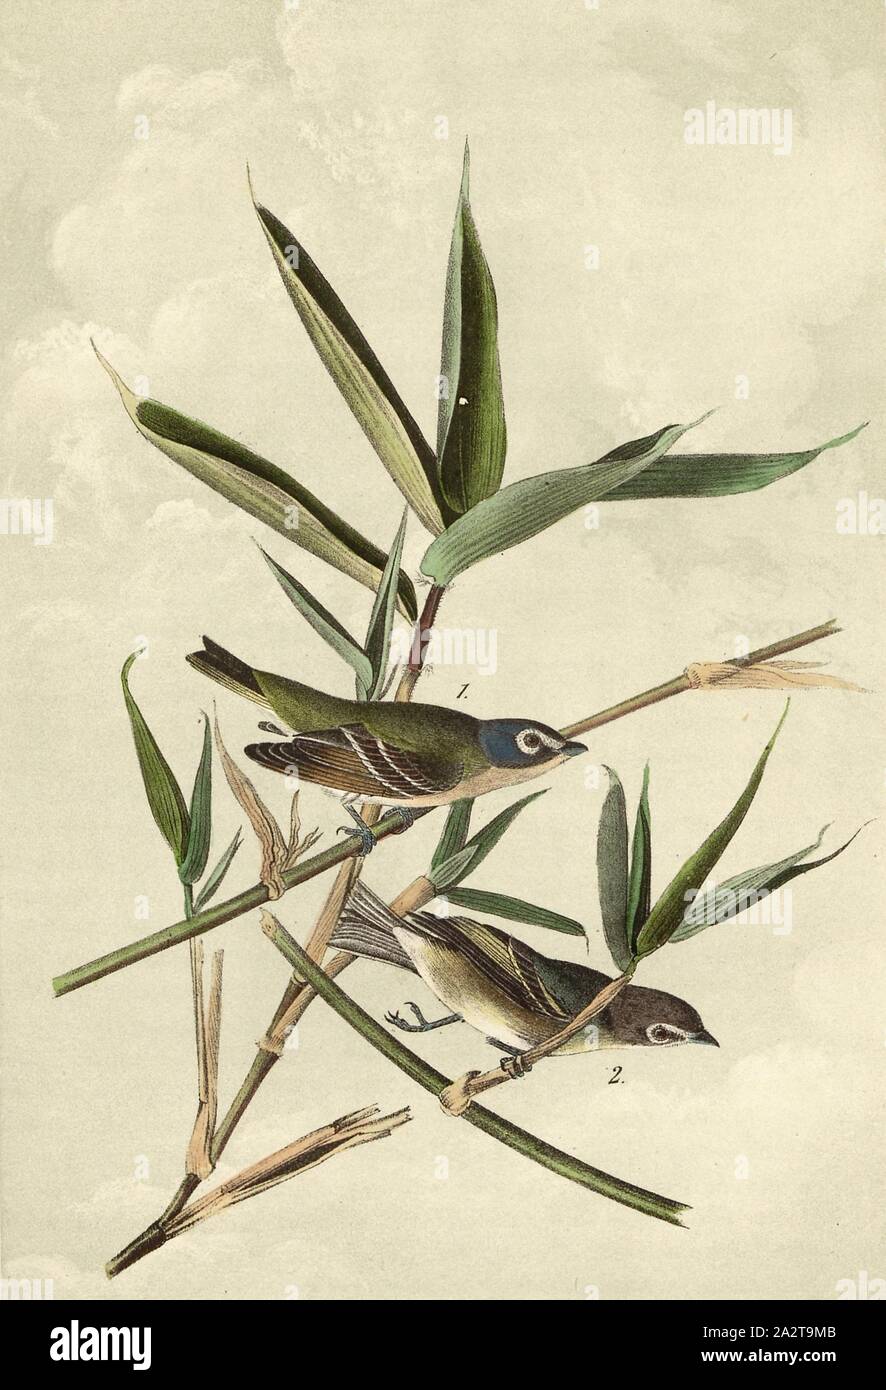 Solitary Vireo or Greenlet - American Bane. Miegia macrosperma, Blue-headed Vireo (Vireo solitarius), Signed: J.J. Audubon, J.T. Bowen, lithograph, Pl. 239 (vol. 4), Audubon, John James (drawn); Bowen, J. T. (lith.), 1856, John James Audubon: The birds of America: from drawings made in the United States and their territories. New York: Audubon, 1856 Stock Photo